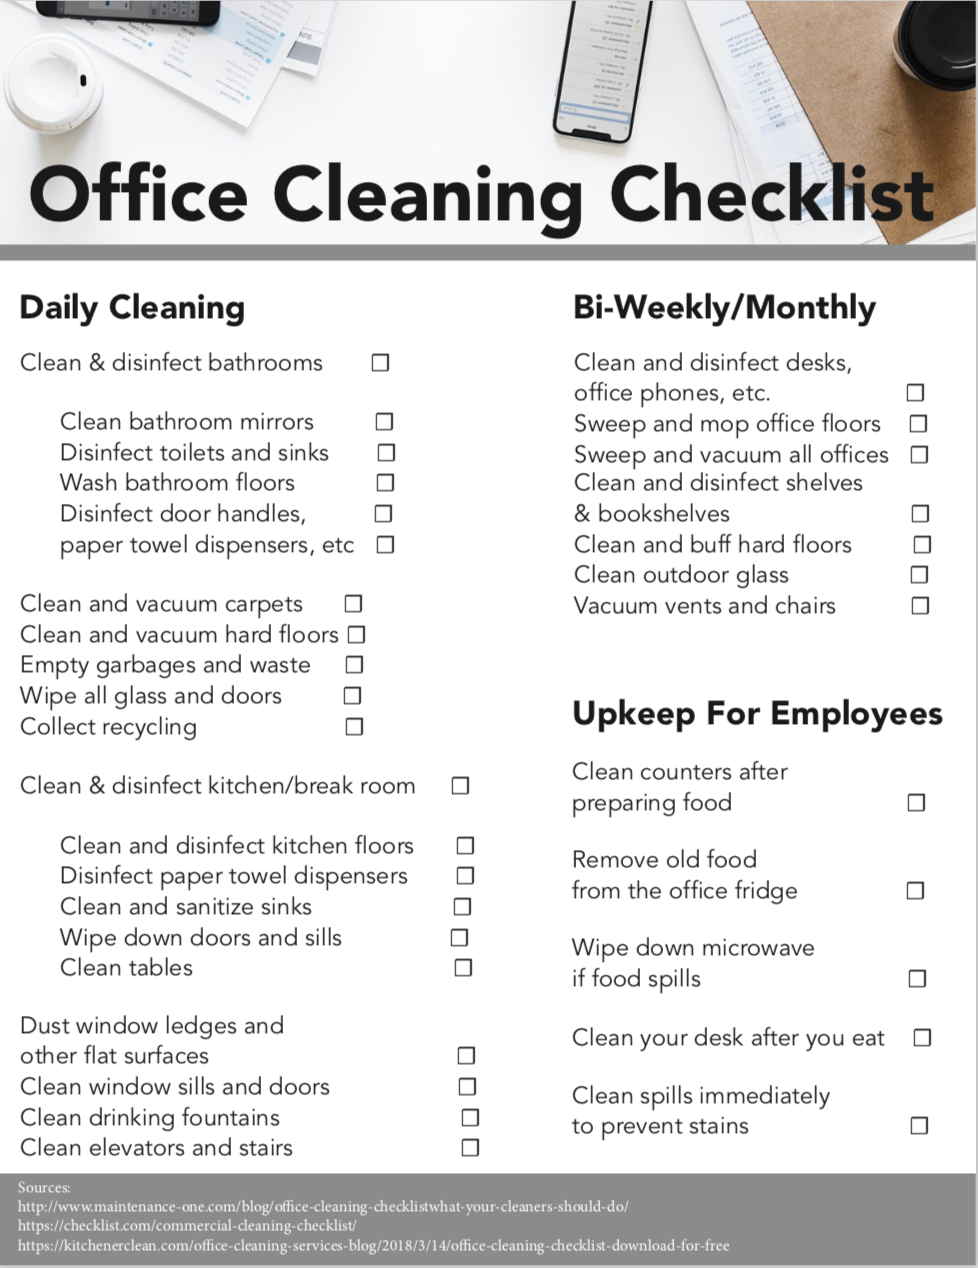 Office Cleaning Checklist - Download for Free — Kitchener Clean Regarding Janitorial Cleaning Checklist Template Intended For Janitorial Cleaning Checklist Template